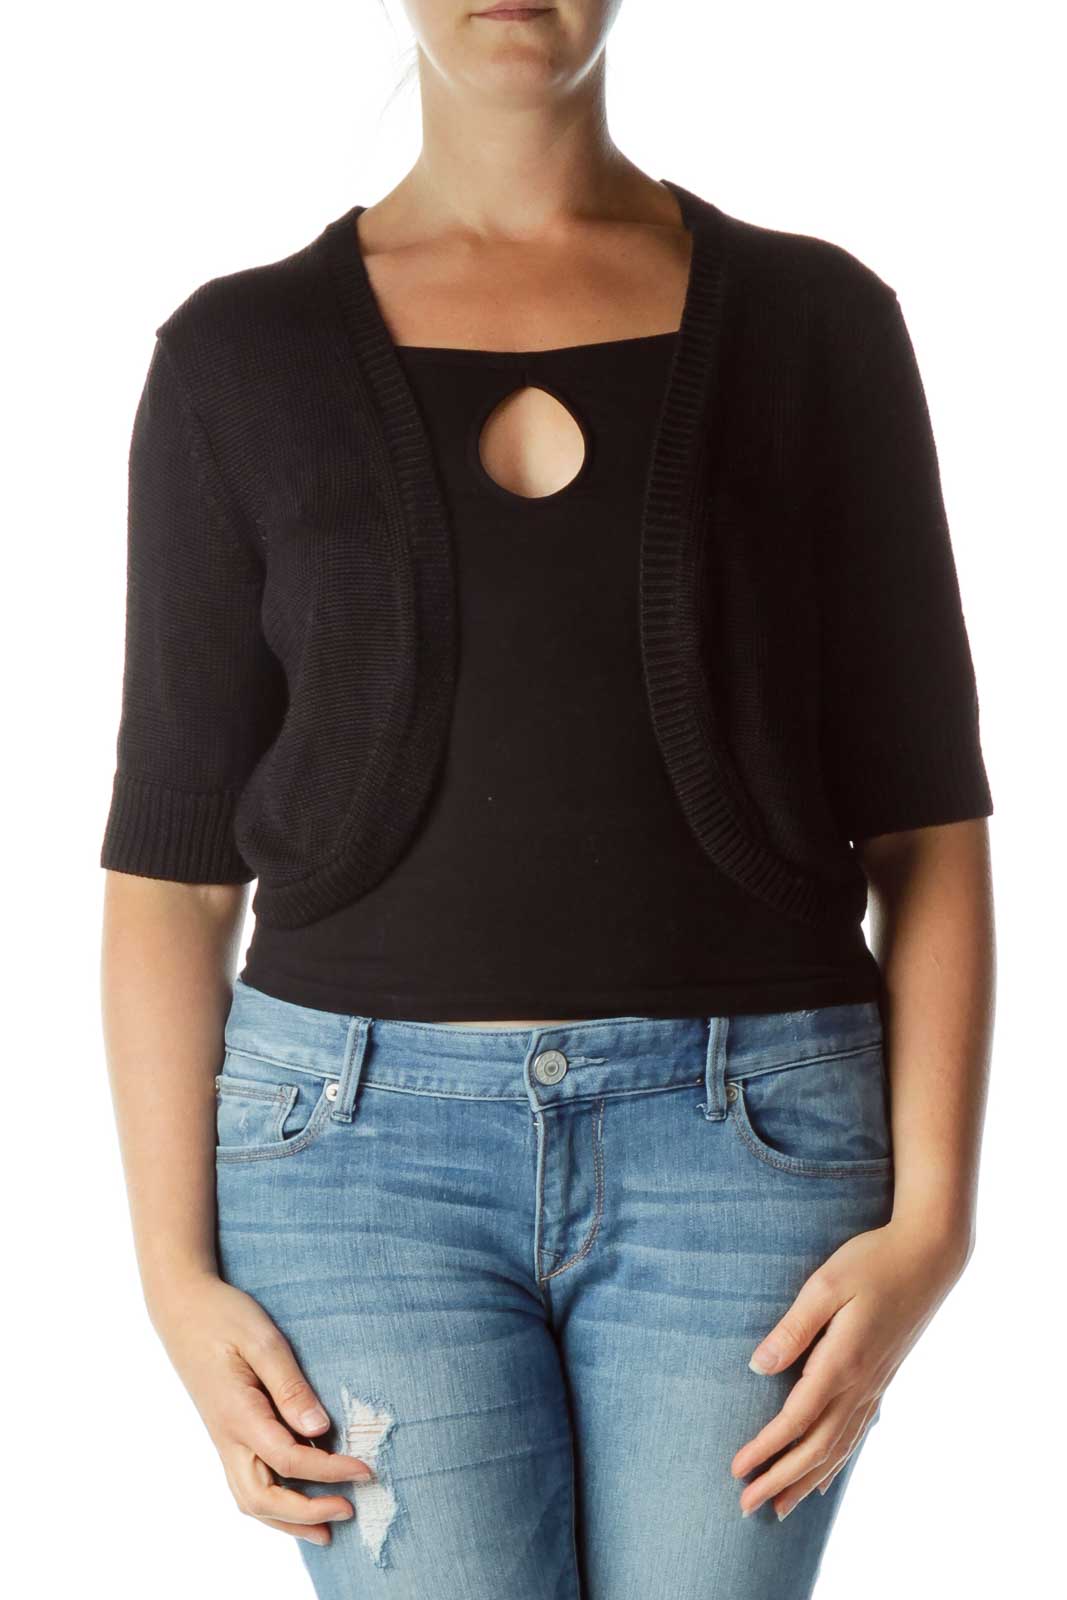 Black Cable Knit Sweater Front